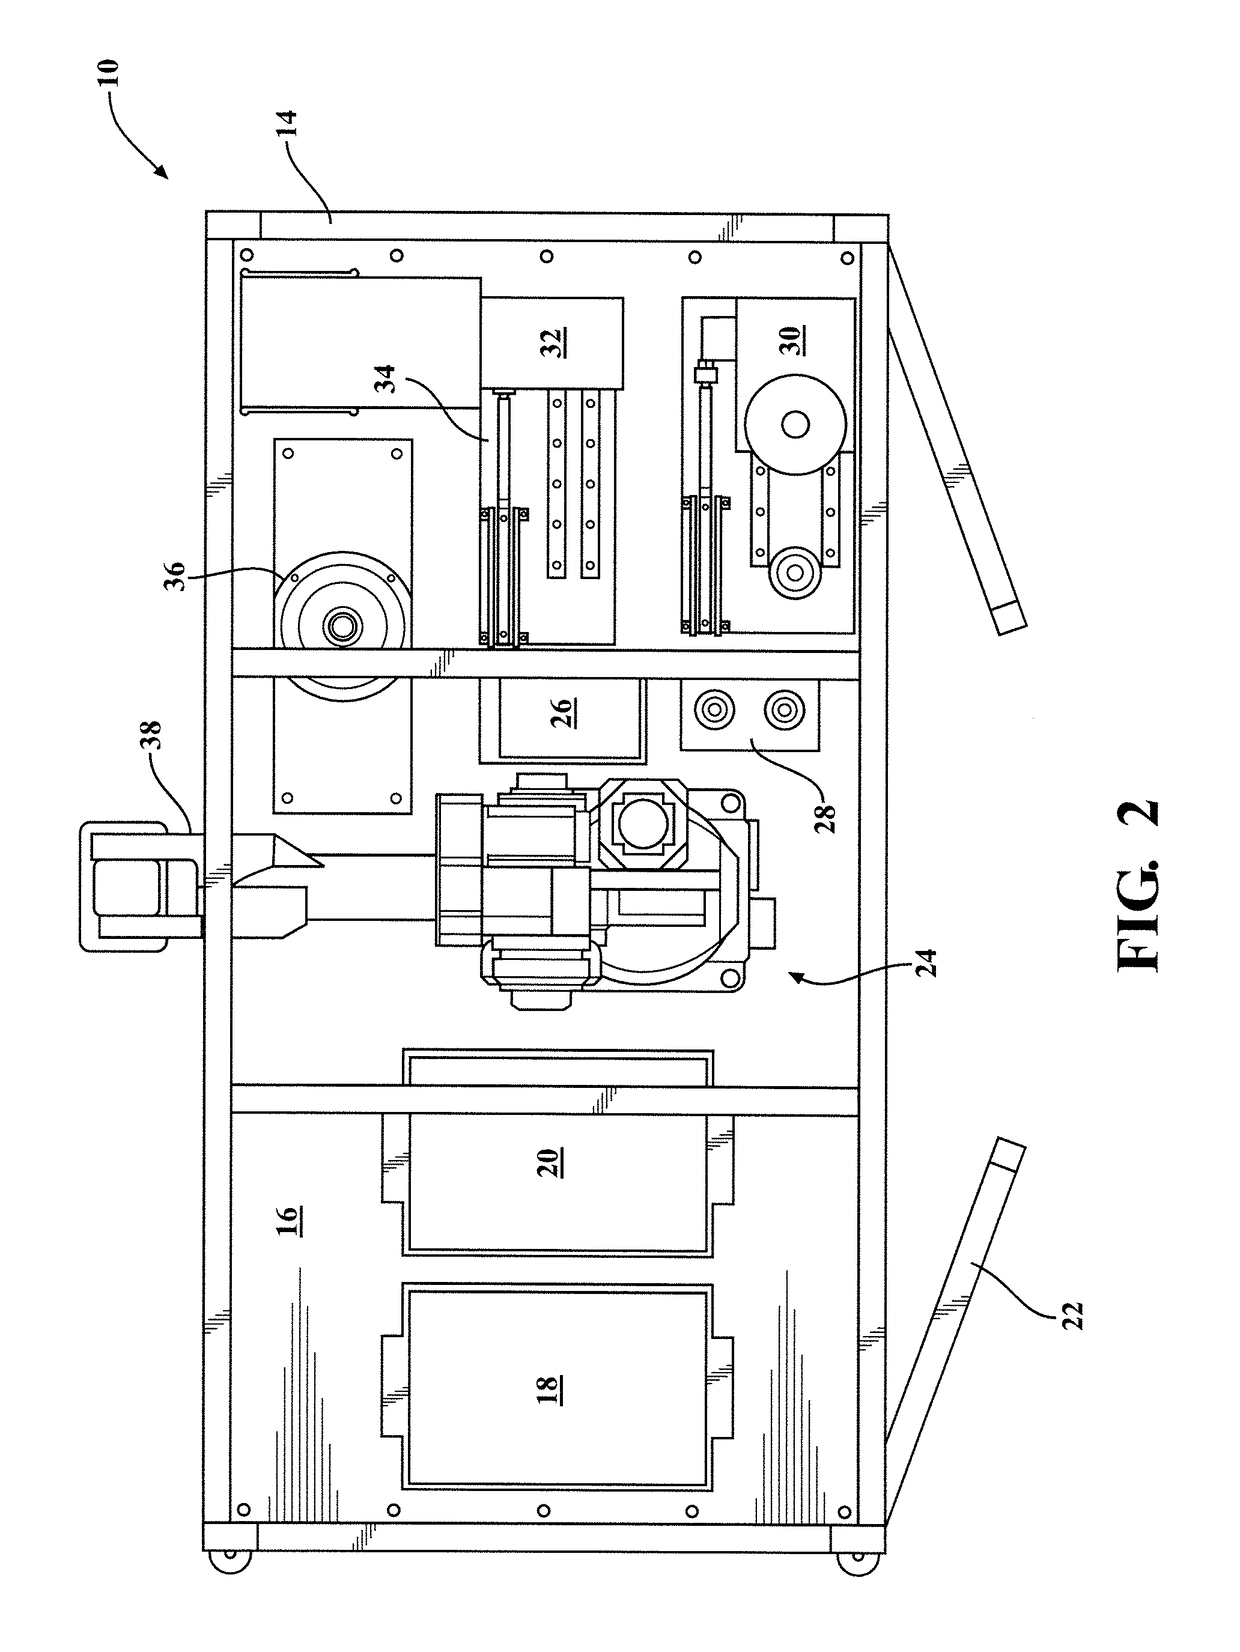 Flexible automation cell for performing secondary operations in concert with a machining center and roll check operations